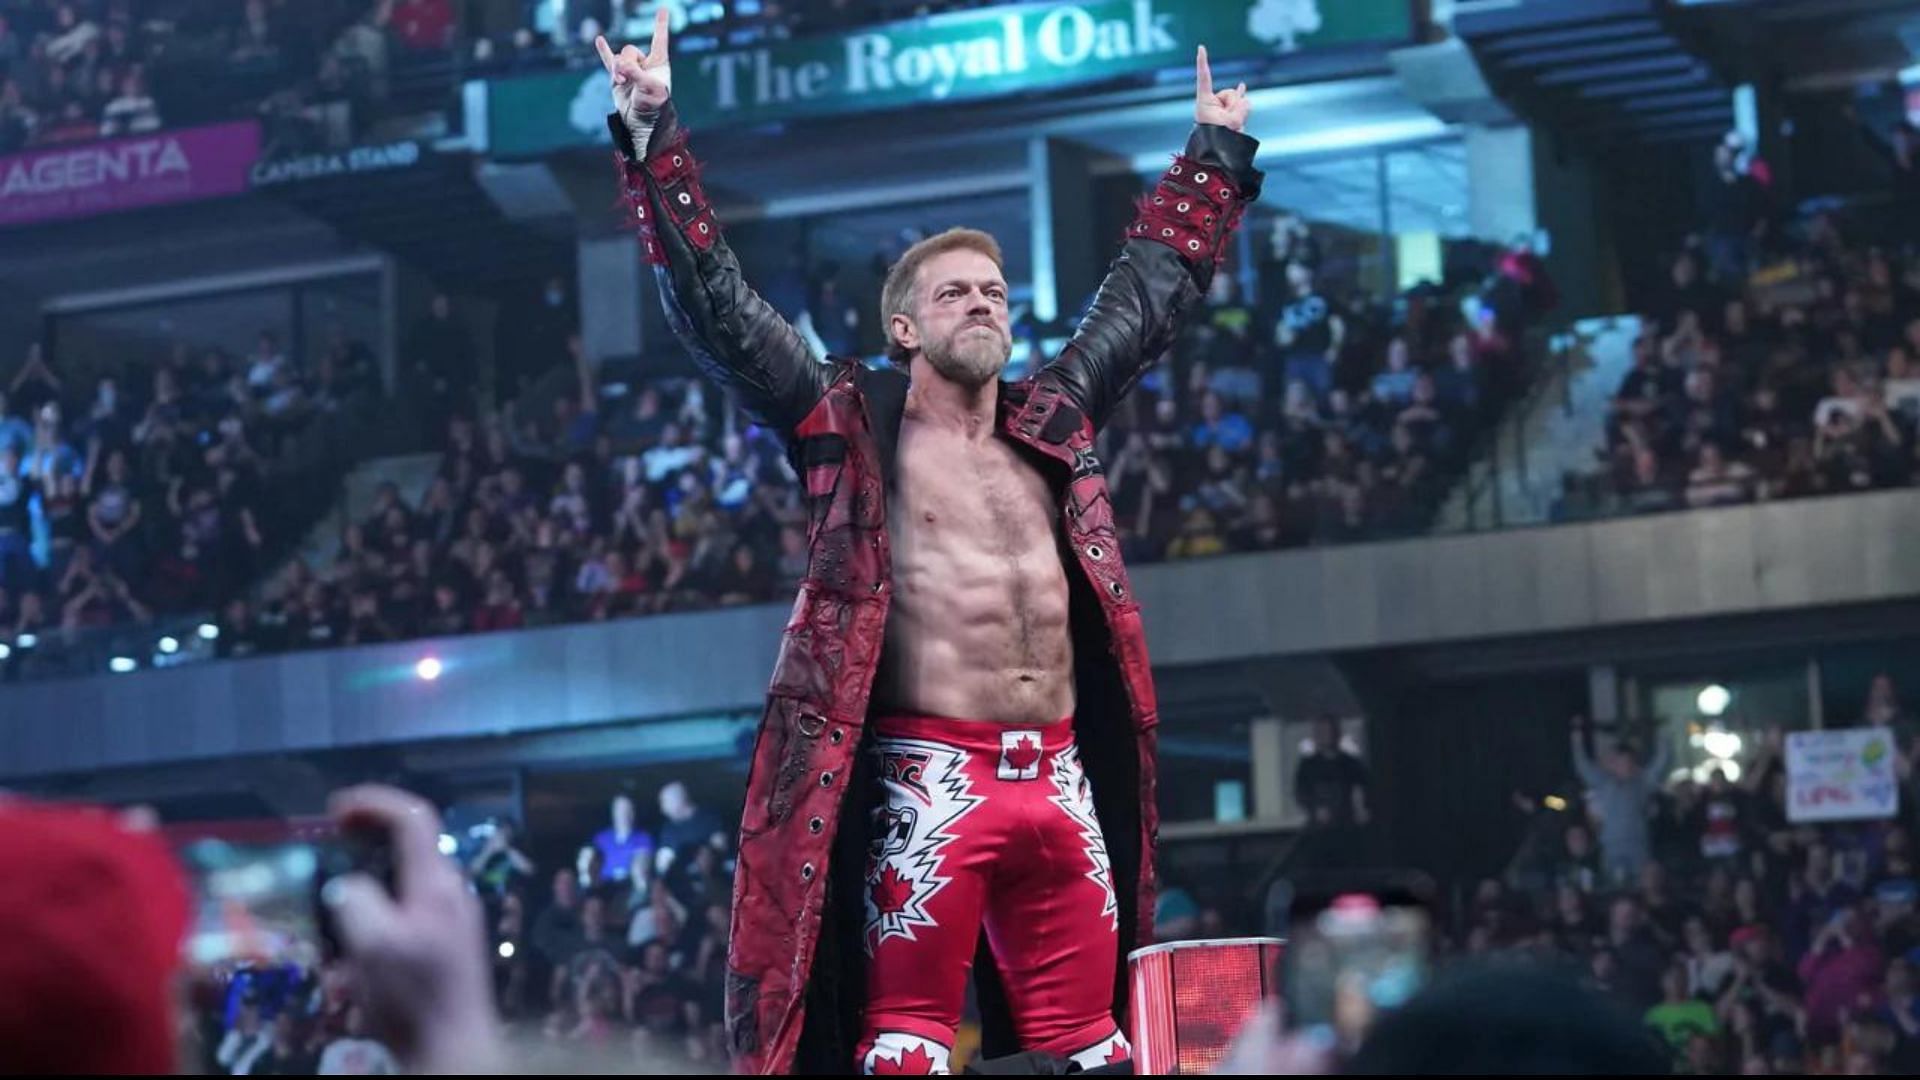 Edge is a WWE Hall of Famer who has been speculated to go to AEW